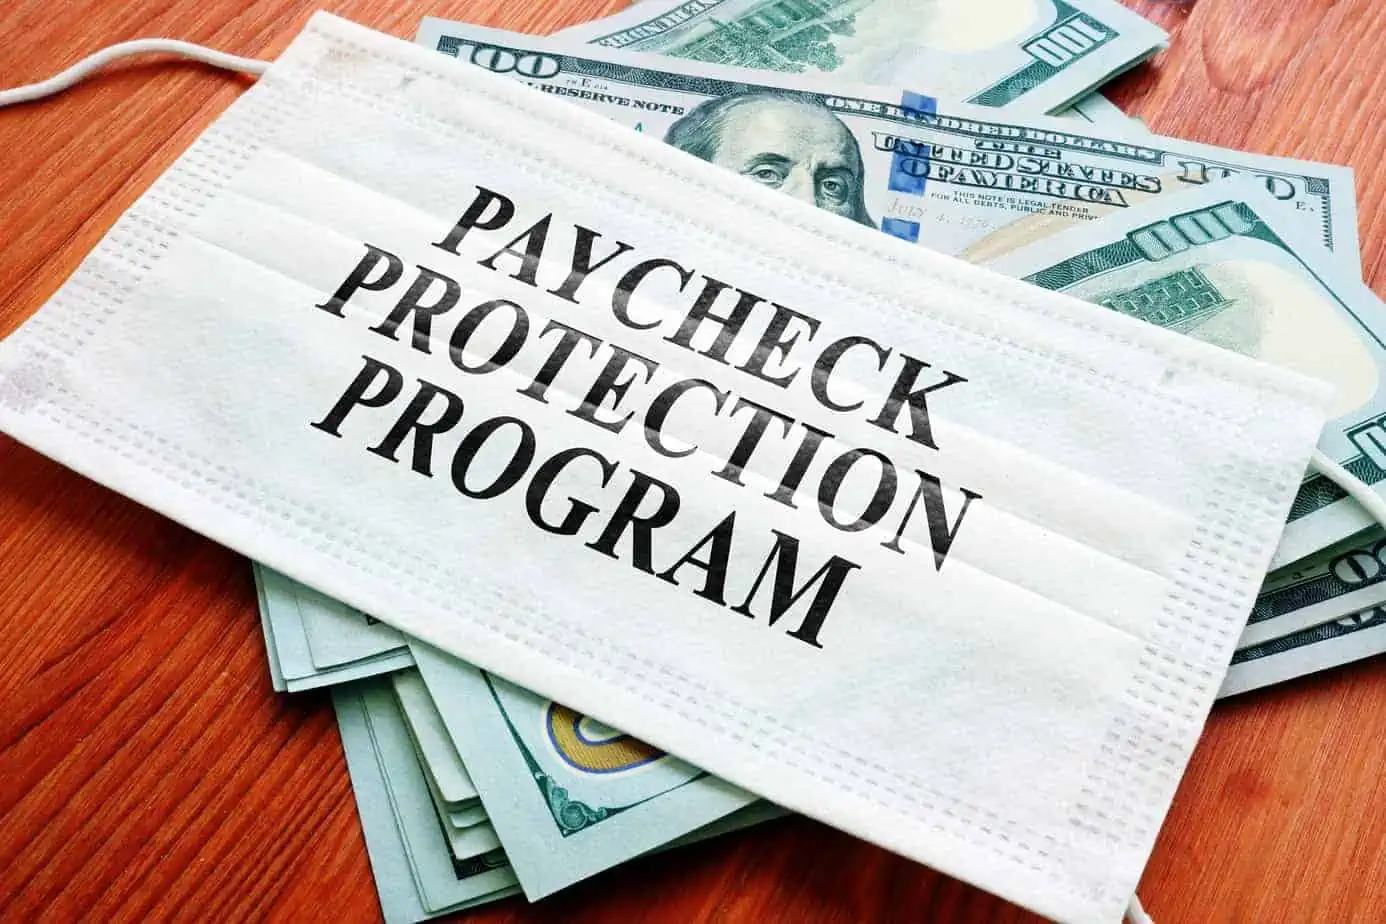 ppp-paycheck-protection-program-as-sba-loan-written-on-the-mask-181147250